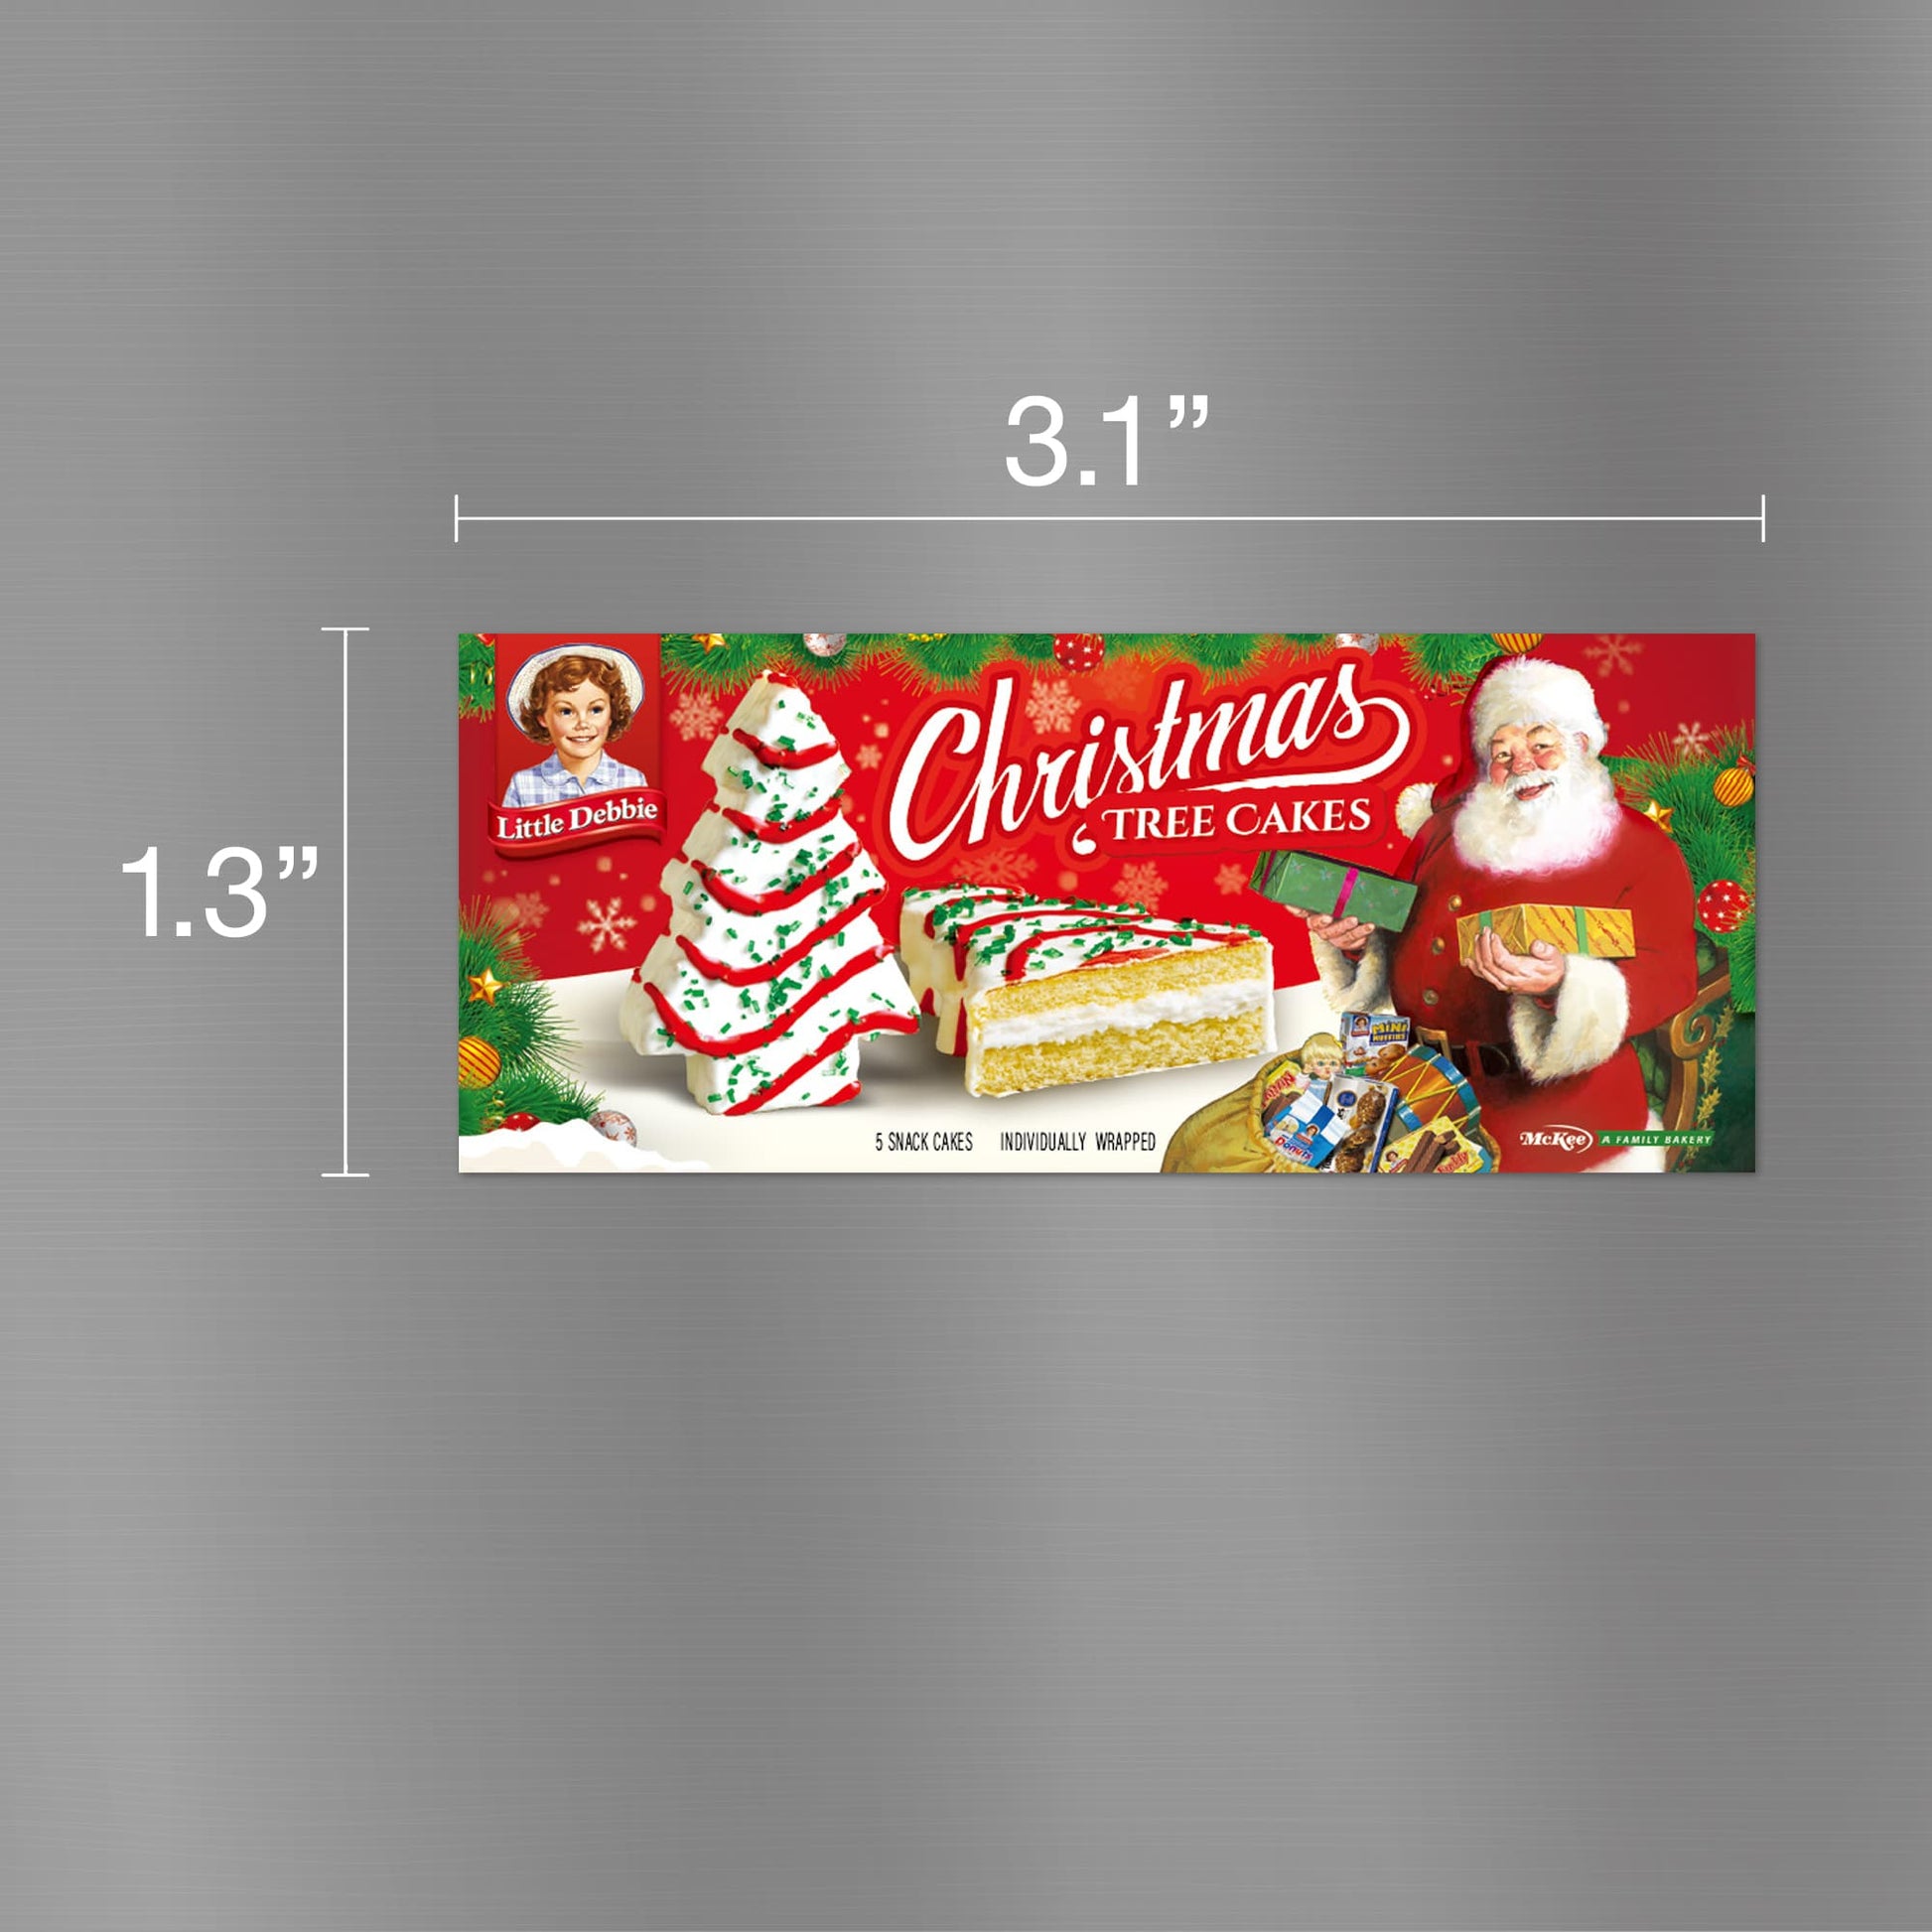 Graphic image of a Little Debbie Christmas Tree Cake carton magnet. The magnet is 3.1 inches wide and 1.3 inches tall, depicting a festive red package adorned with images of the Little Debbie logo, a smiling Santa Claus holding a gift, and a Christmas Tree Cake decorated with green frosting and red sprinkles. Additionally, there are images of the actual snack cakes, sliced to show their creamy filling.